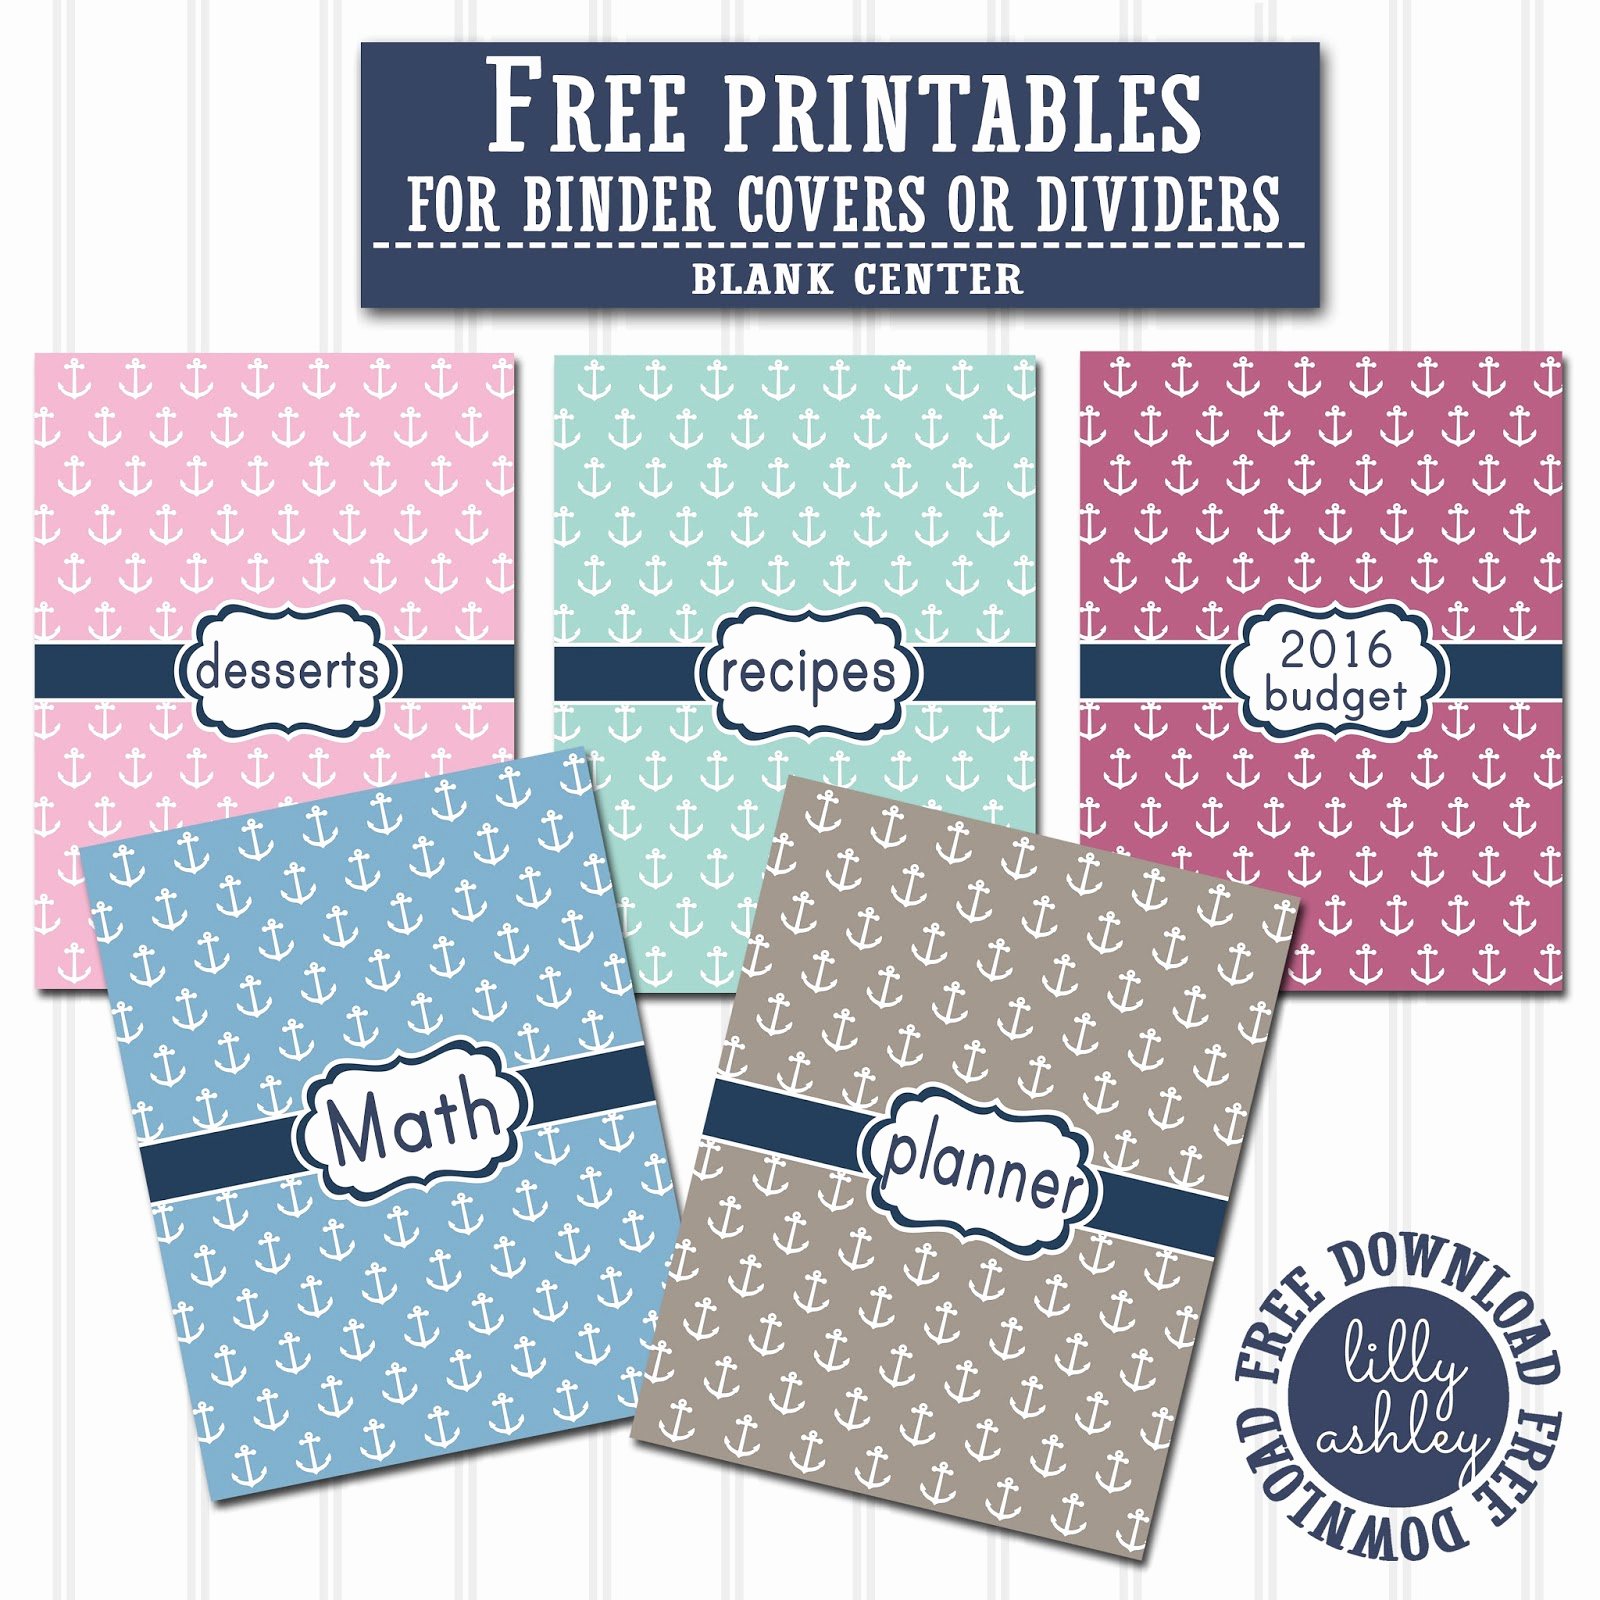 Free Printable Binder Covers Unique Make It Create by Lillyashley Freebie Downloads Free